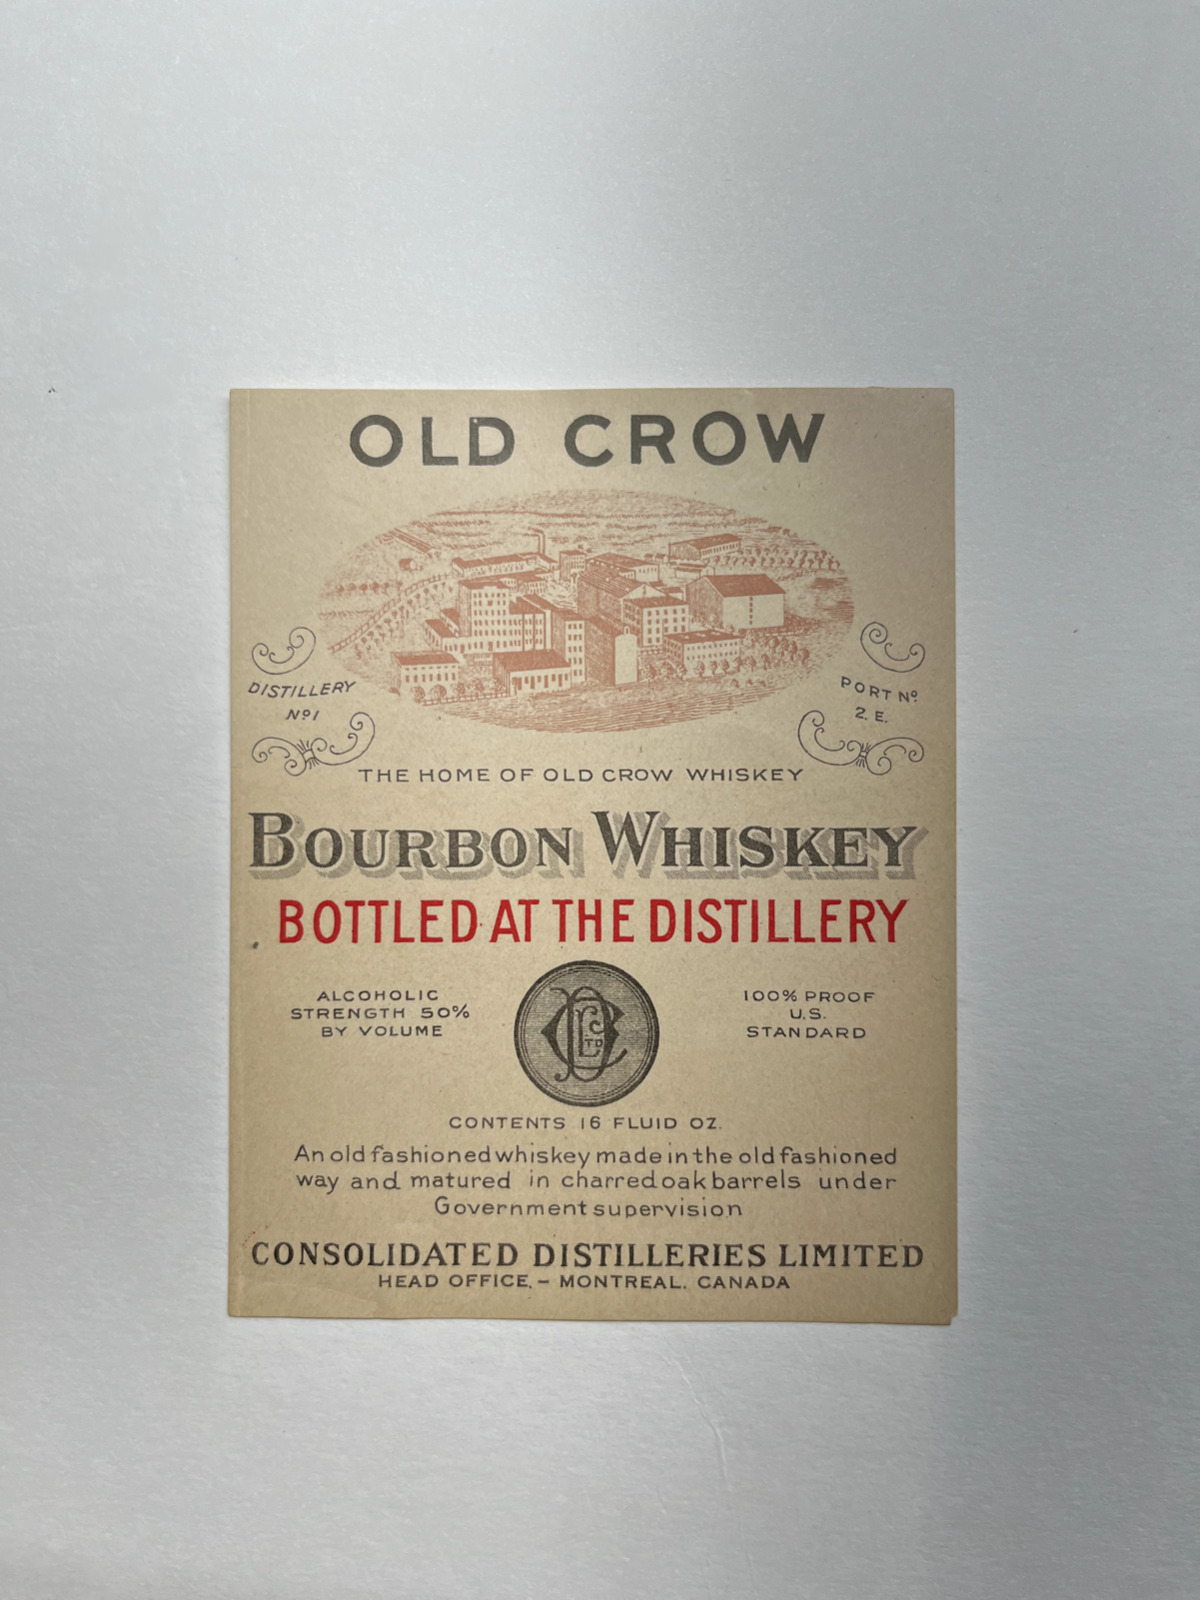 RARE 1920s Prohibition Era OLD CROW BOURBON WHISKEY Label New Old Stock Nr Mint